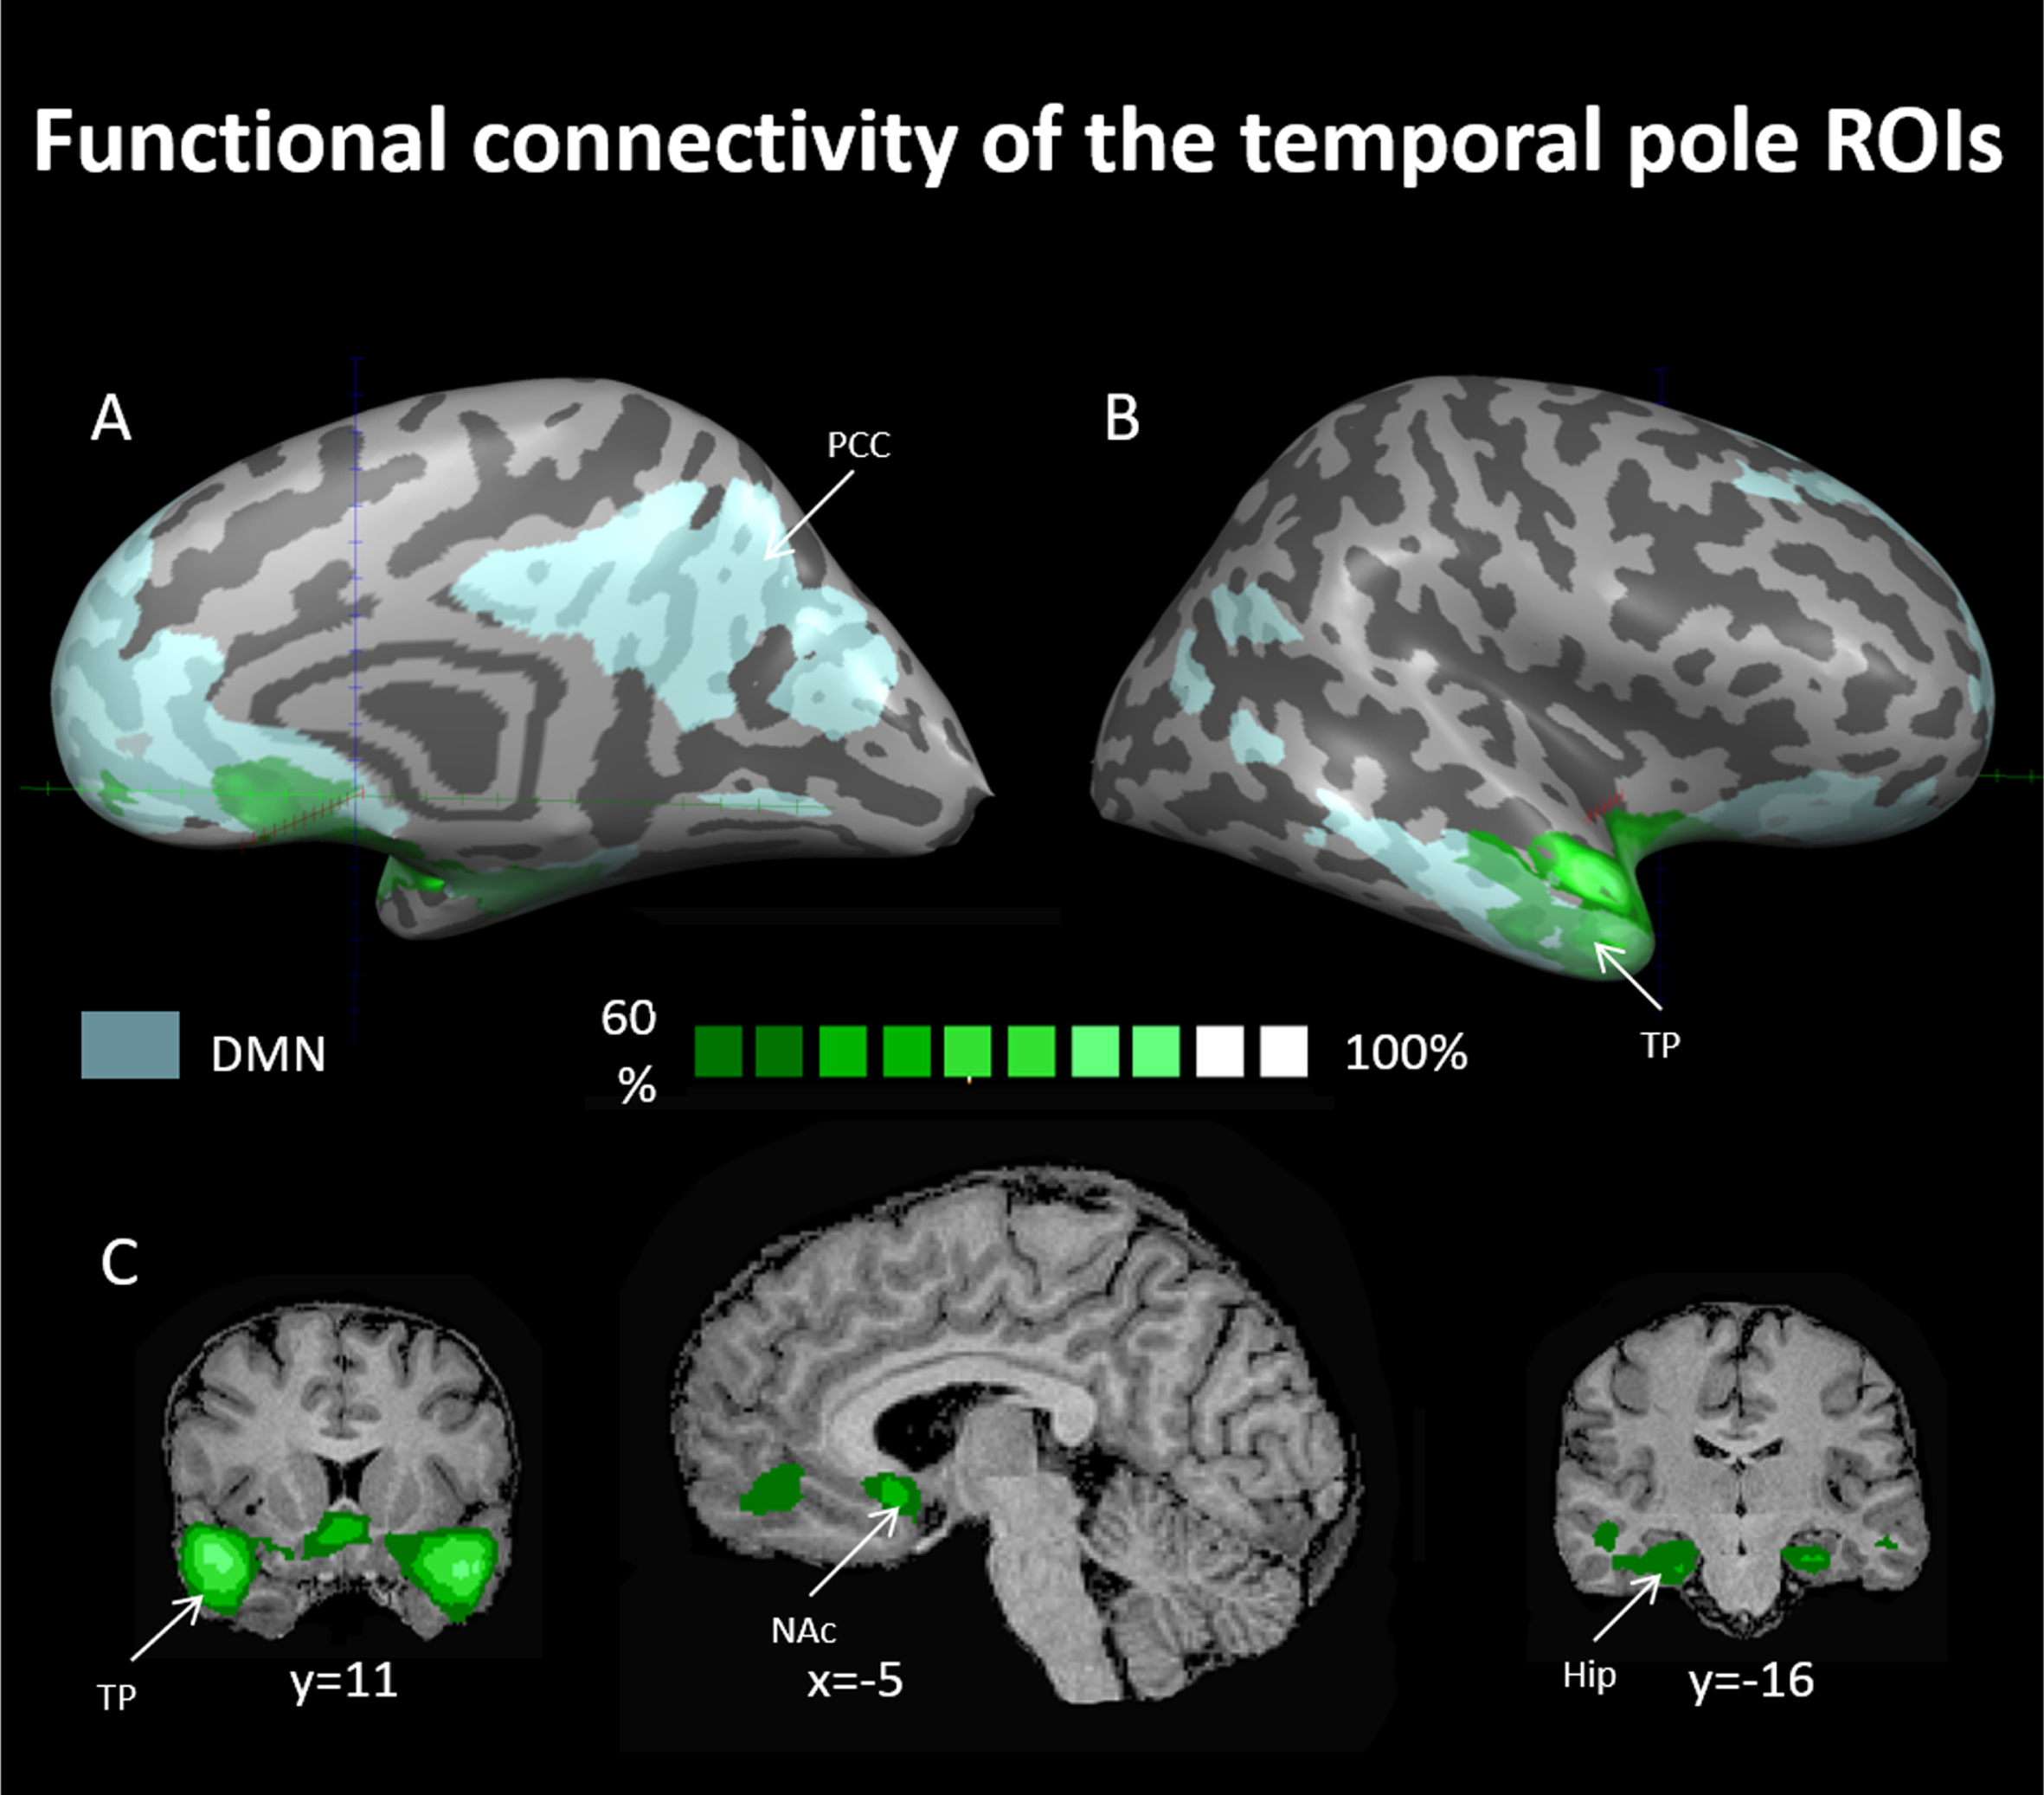 Probability maps for linear correlations of the face movement selective regions in the temporal poles using seed-based analysis. Maps are presented at a threshold of the majority of resting state subjects (60% probability and above –see dark green to bright green scale). ROIs for this analysis were chosen from the progressive muscle relaxation experiment and were used as seeds for computing linear correlations in the data of the resting-state experiment. TP = temporal pole, Hip = hippocampus, PCC = posterior cingulate cortex, NAcc = nucleus accumbens, DMN = default mode network. DMN in light blue as derived from rsFC analysis (see methods).